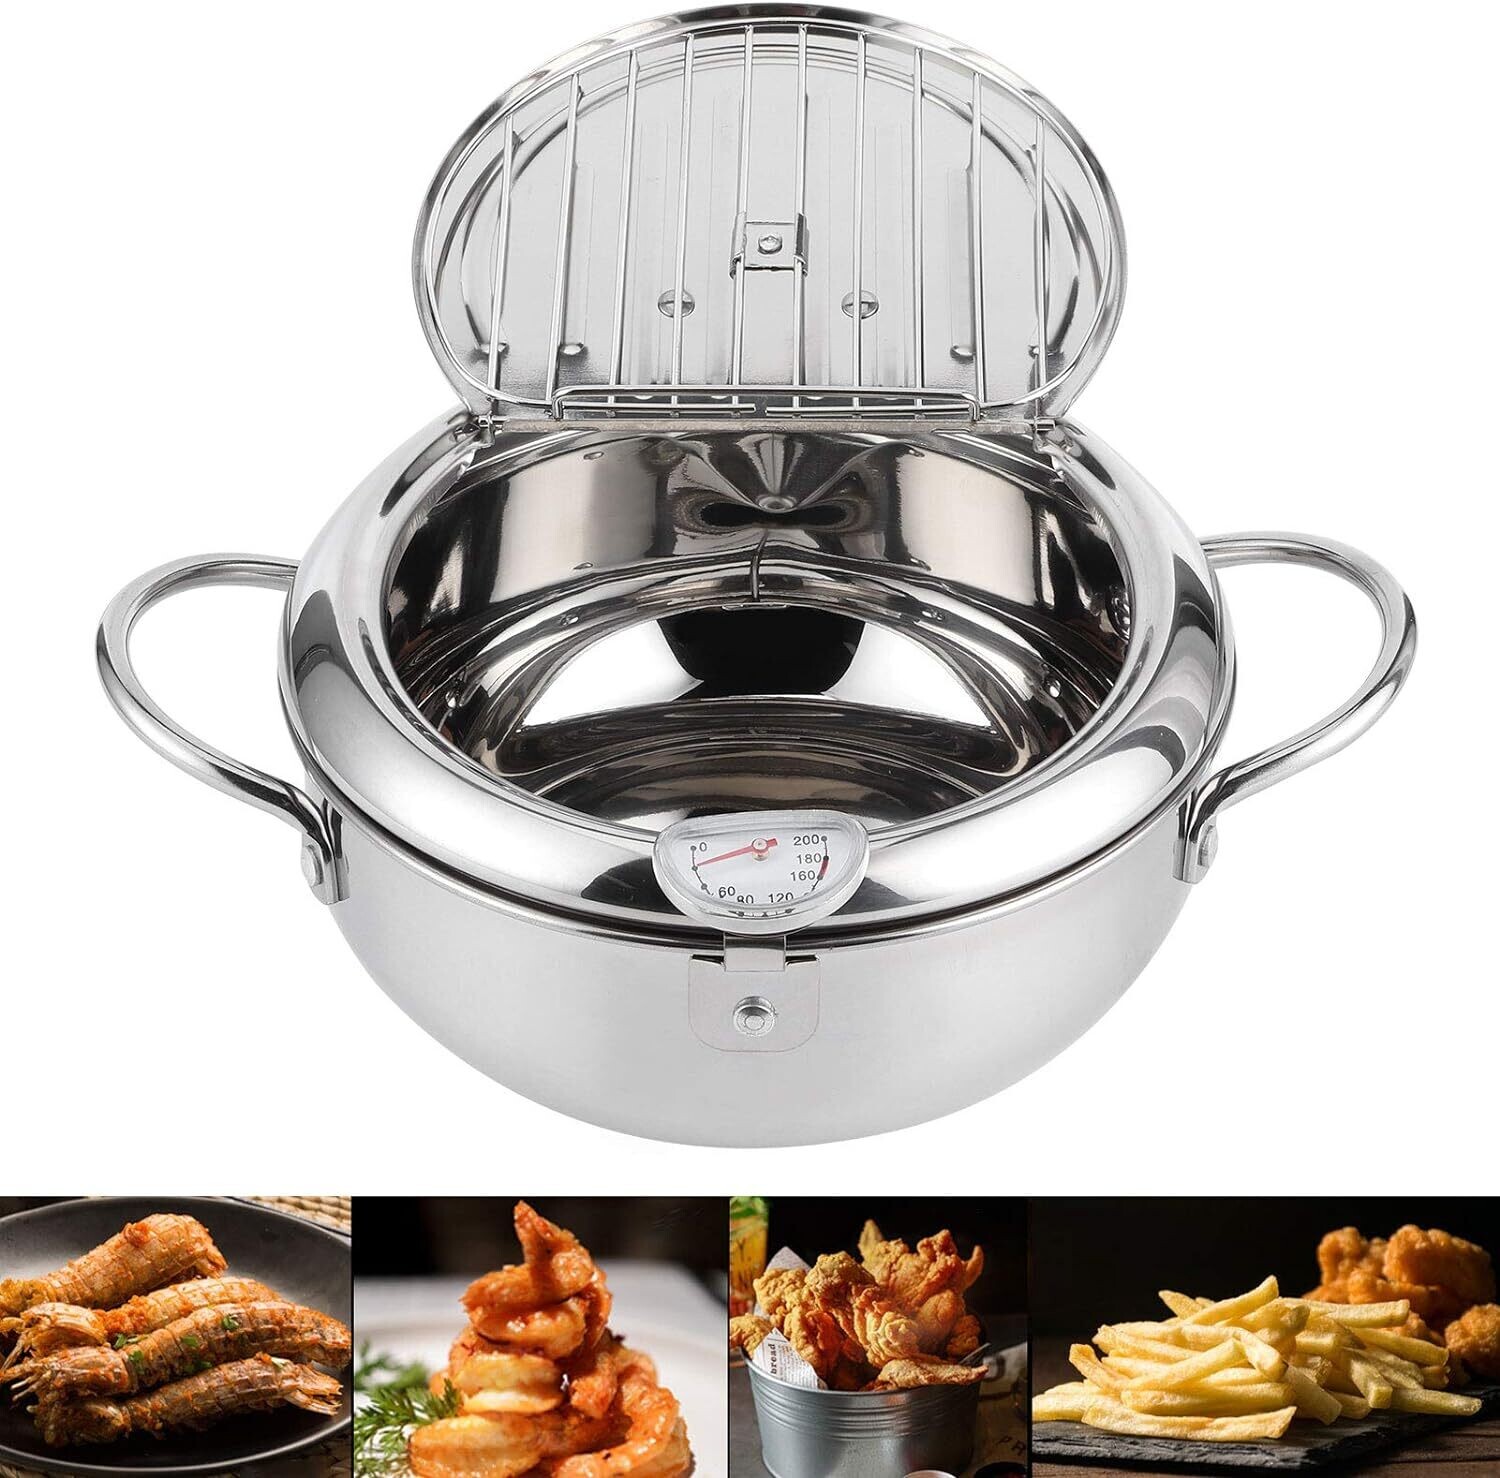 Stainless Steel Induction Cooker/Fryer With Adjustable Temperature